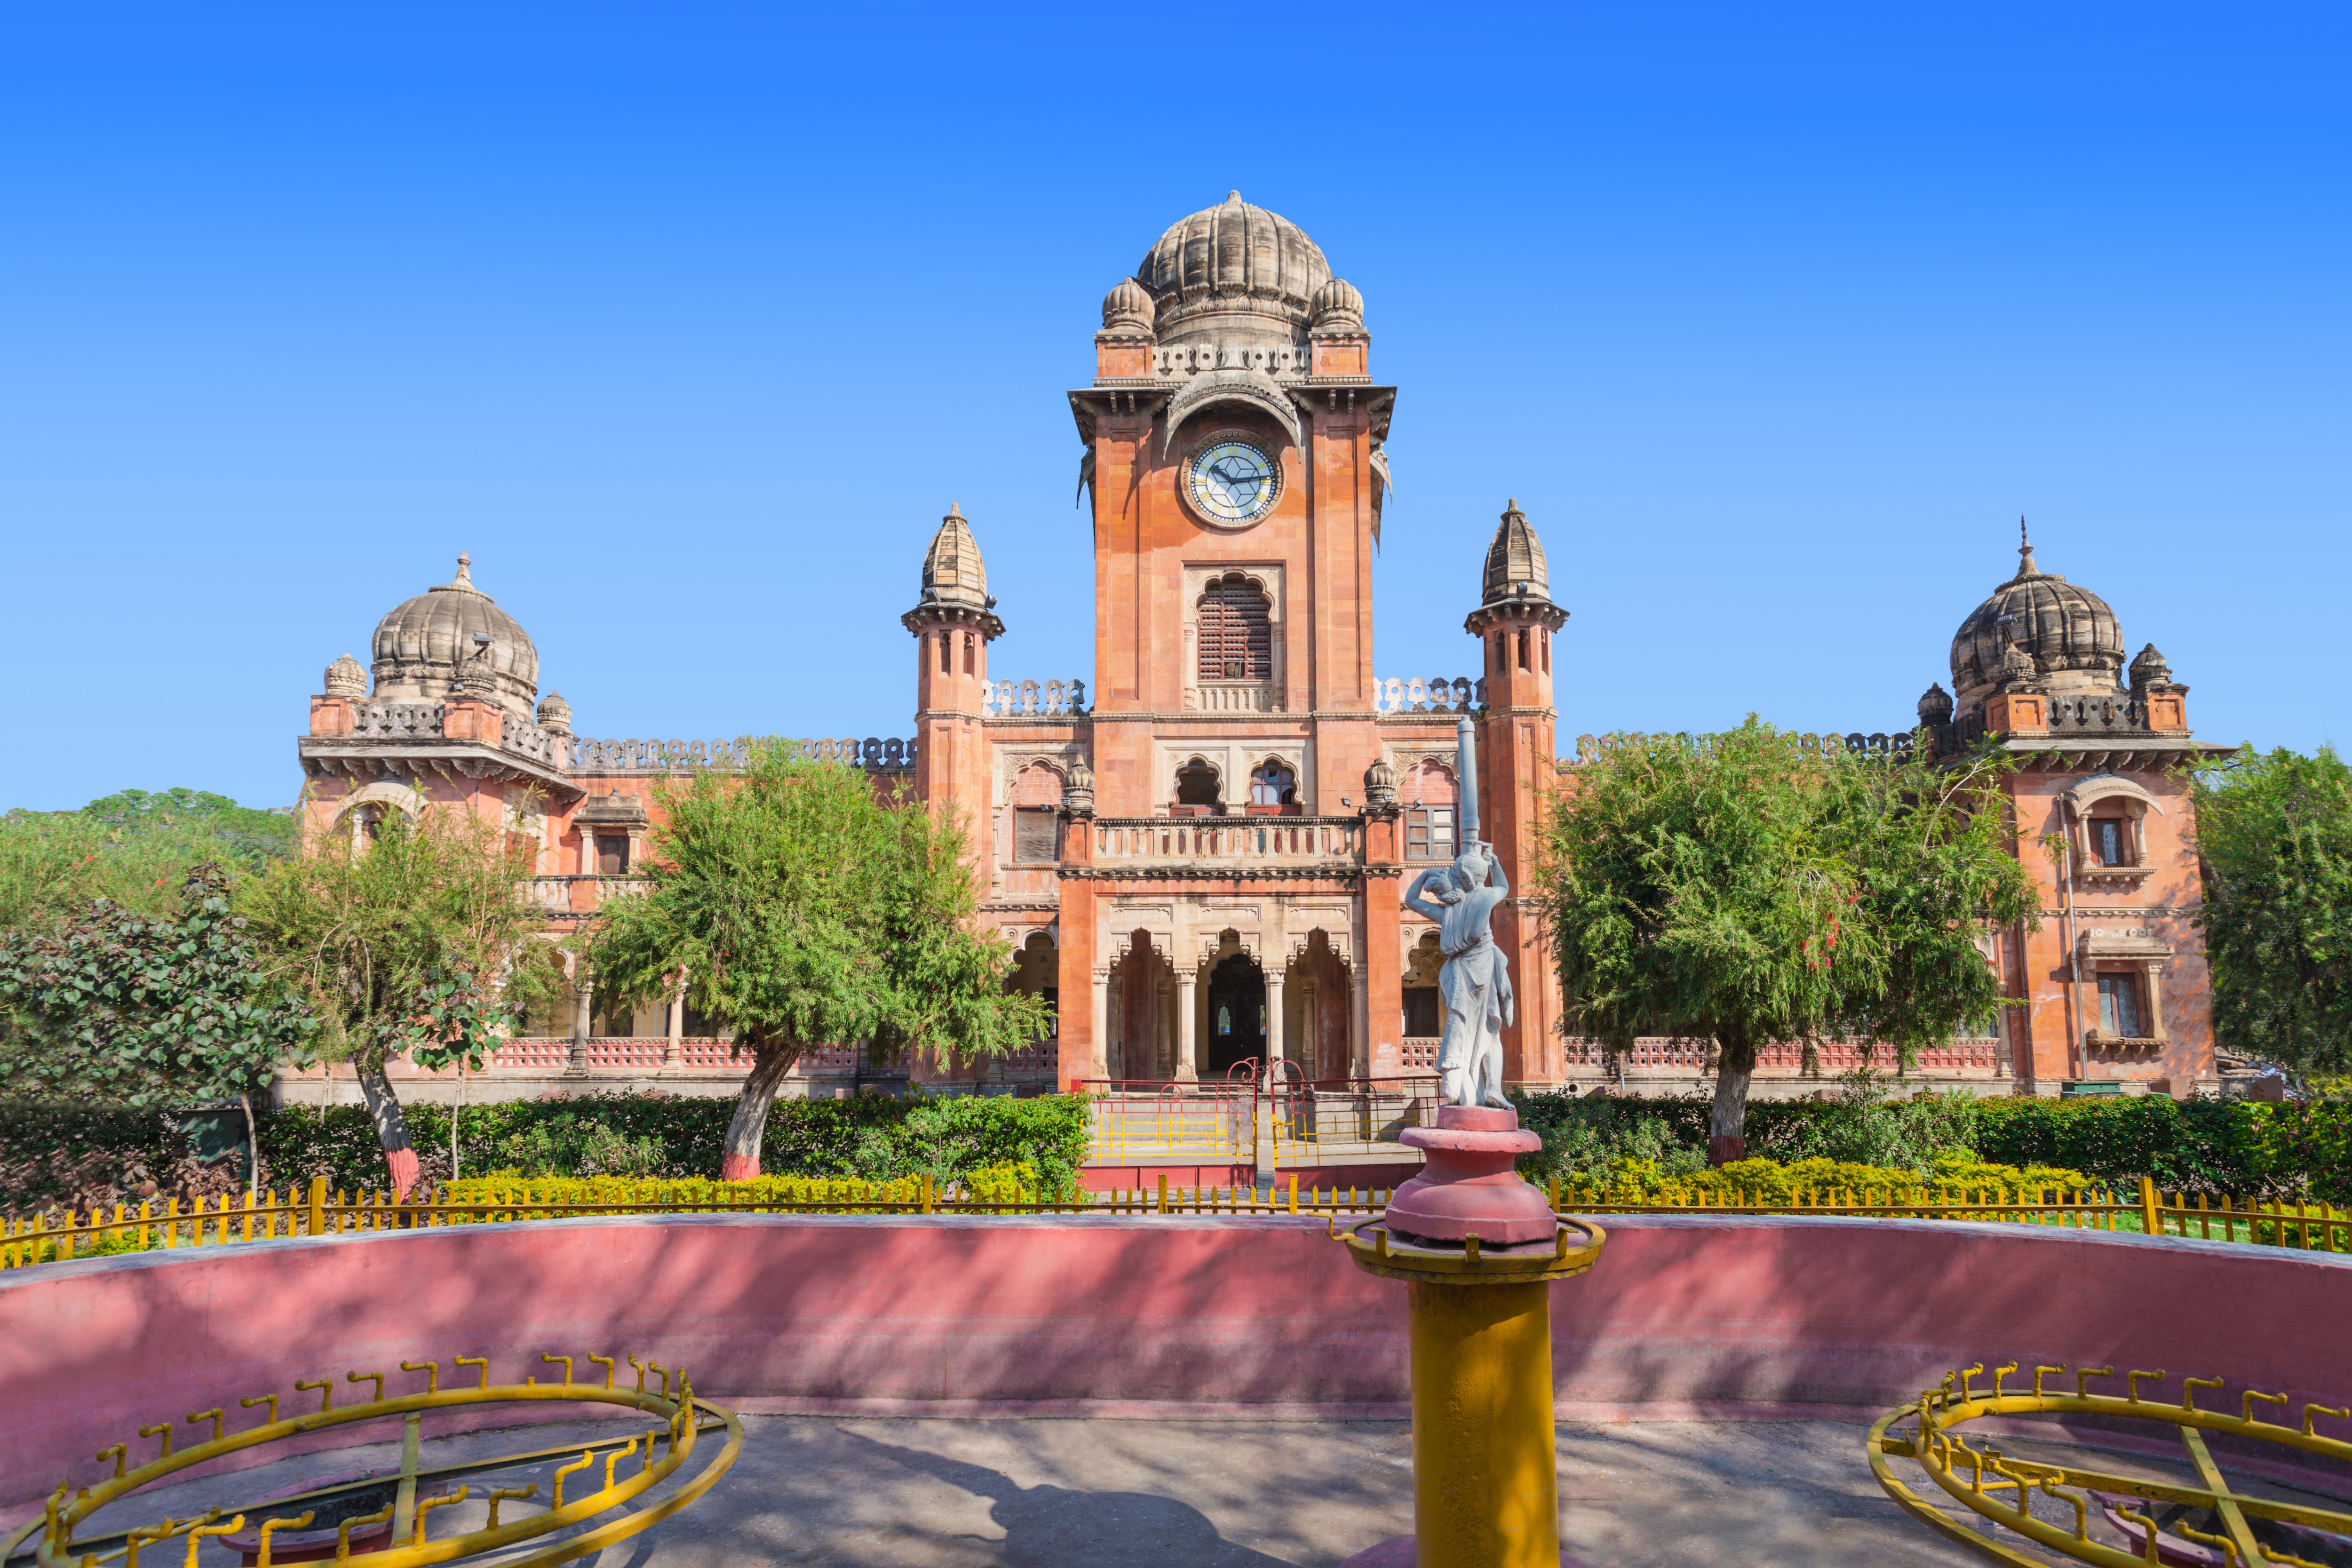 Town Hall - One of the Top Attractions in Indore, India - Yatra.com